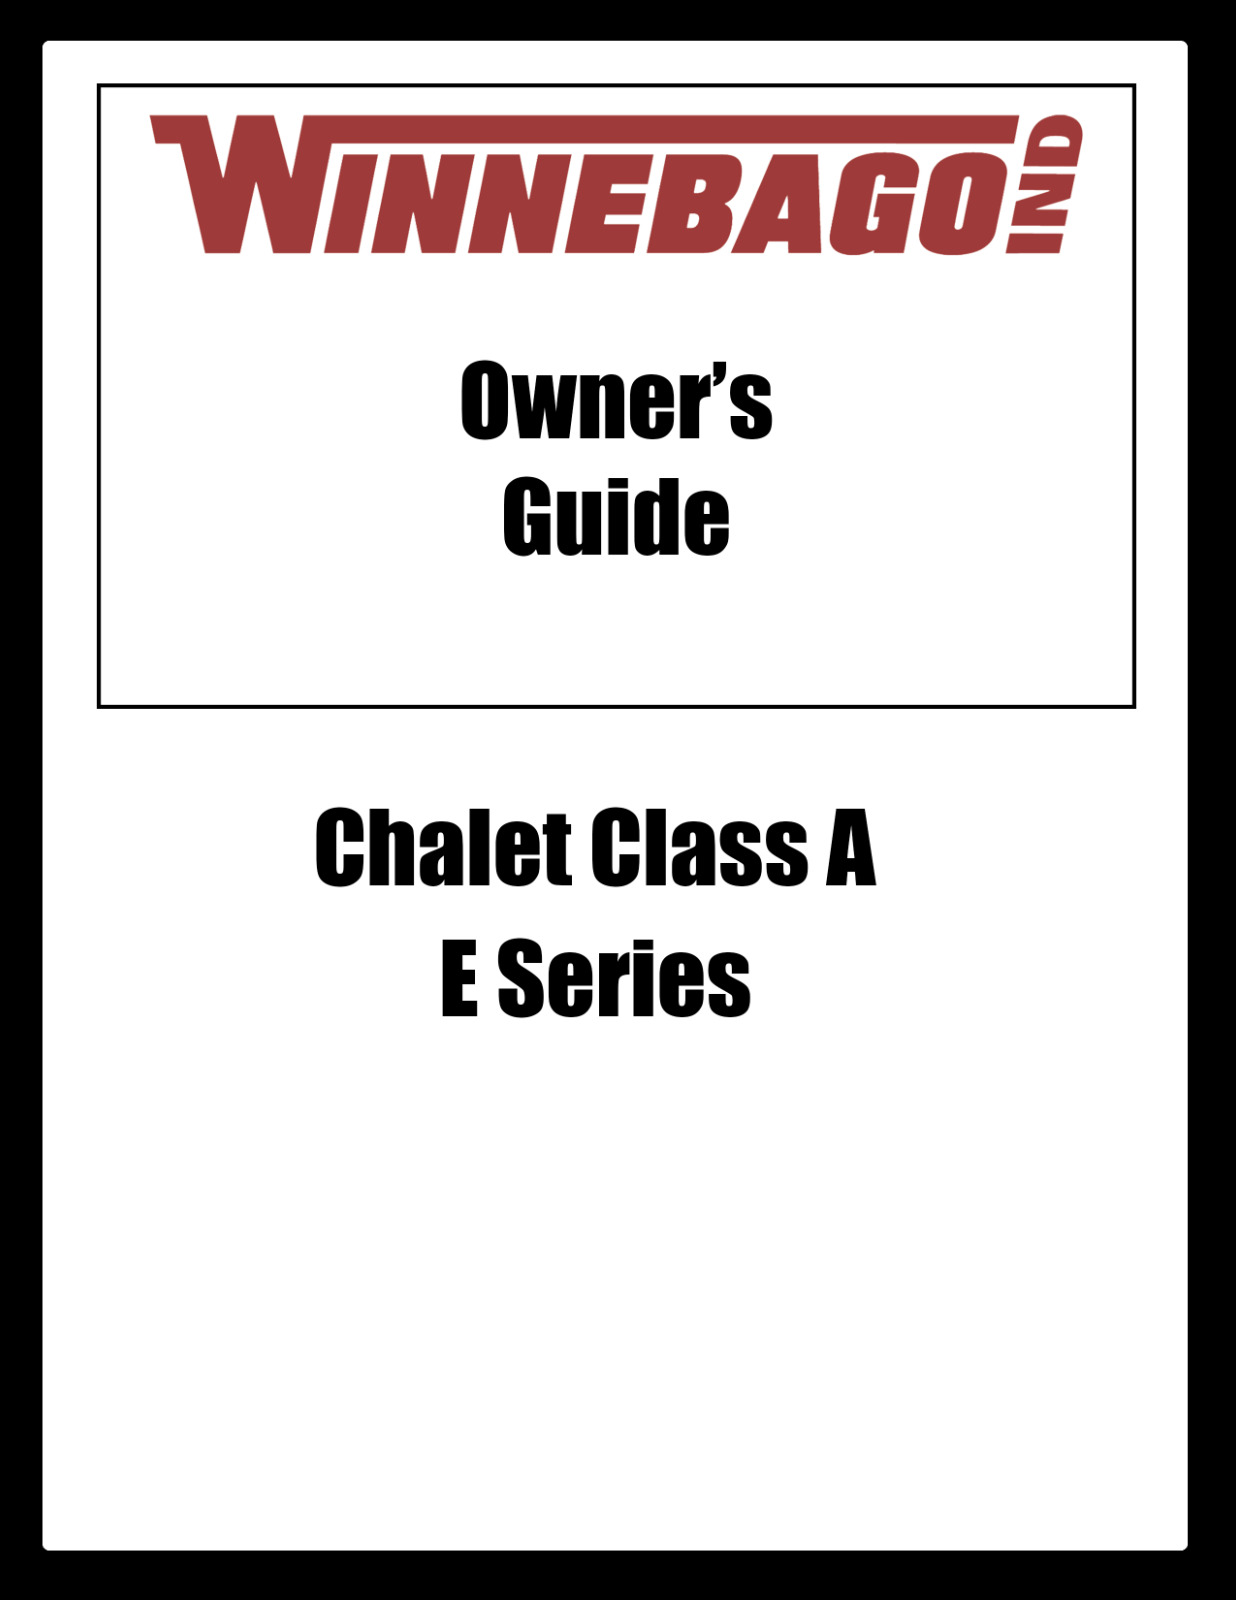 2008 Winnebago Chalet Class A E Series Home Owners Operation Manual User Guide